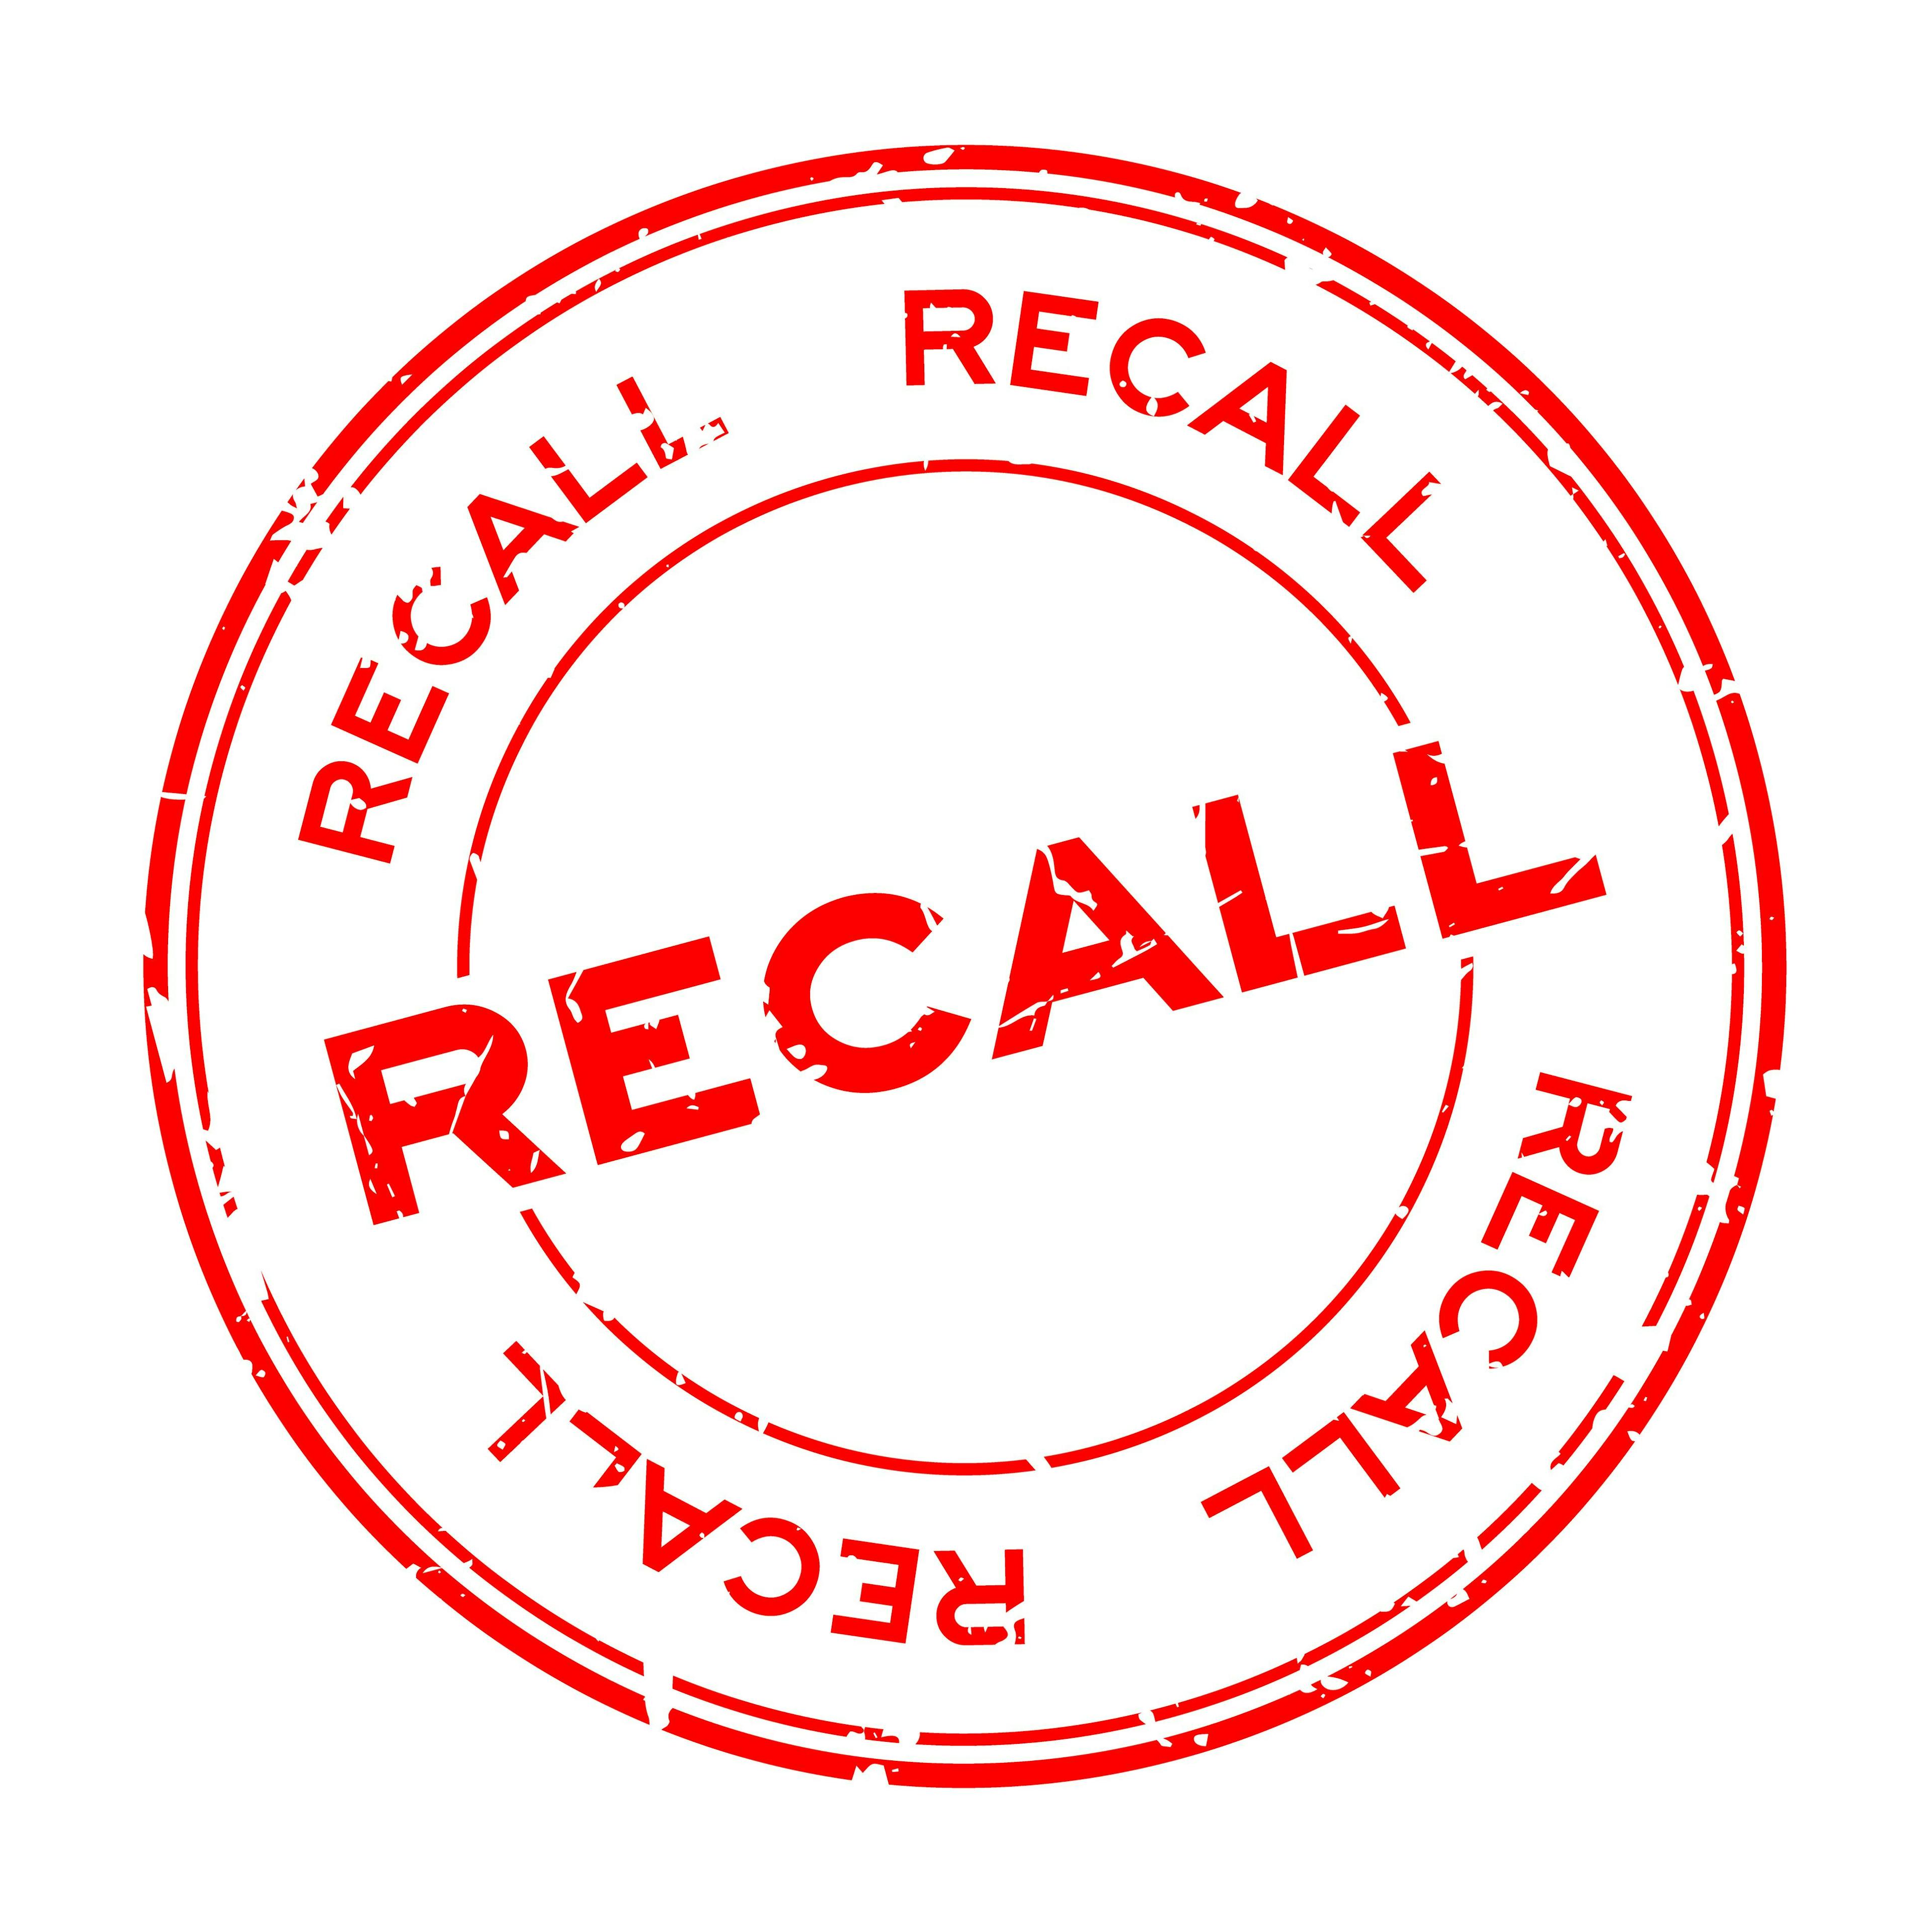 Recall issued for adjunctive refractory complex partial seizures treatment | Image Credit: © bankrx - © bankrx - stock.adobe.com.